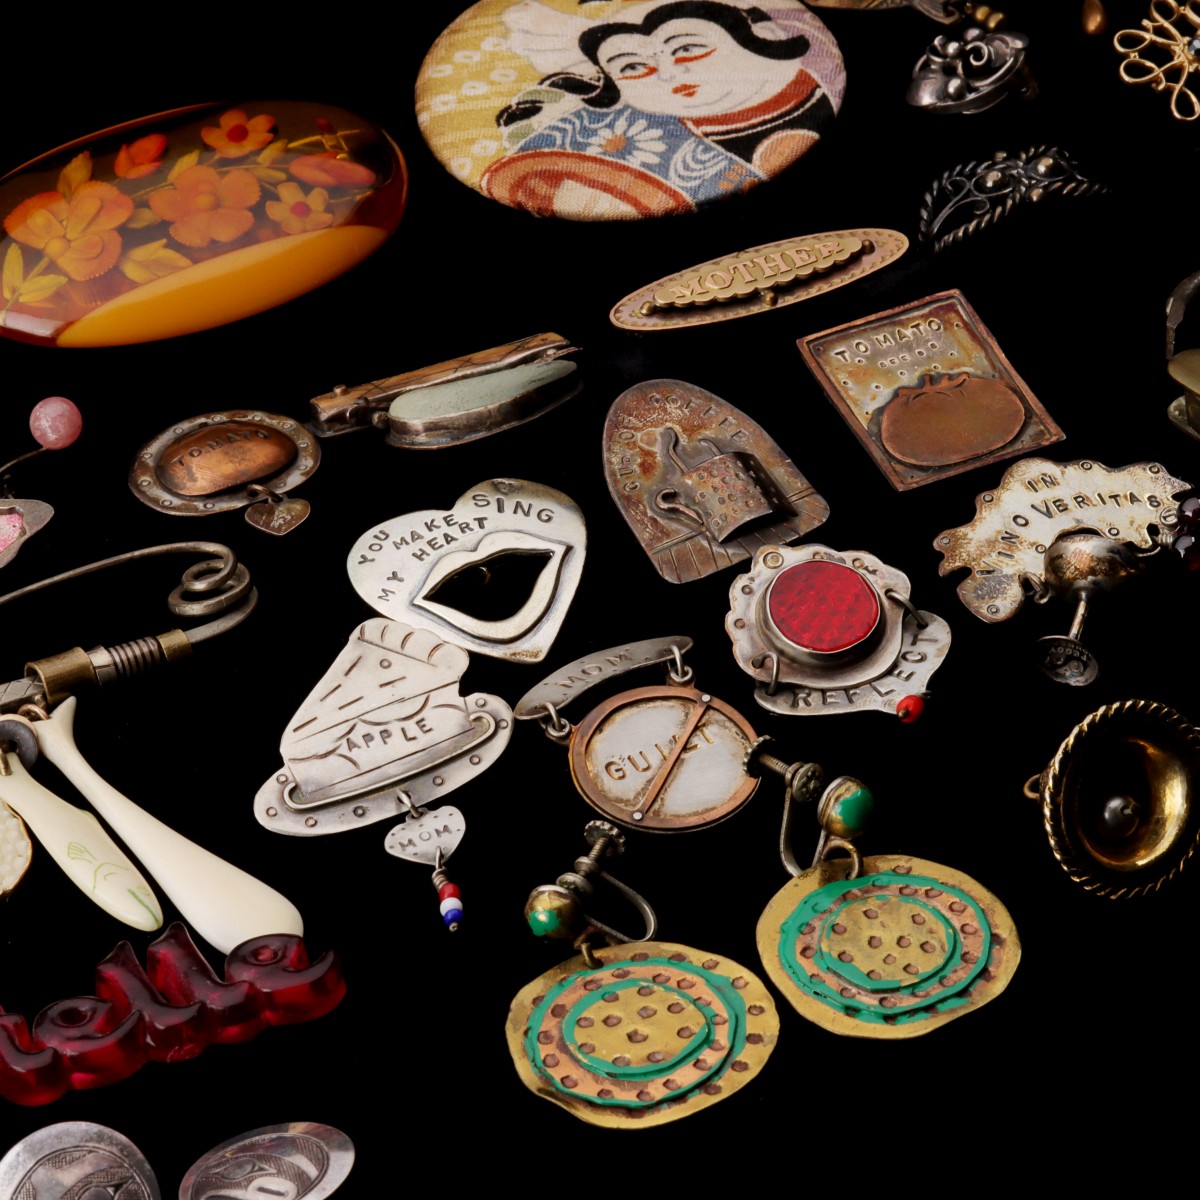 A COLLECTION OF COLLECTIBLE LATE 20TH C JEWELRY